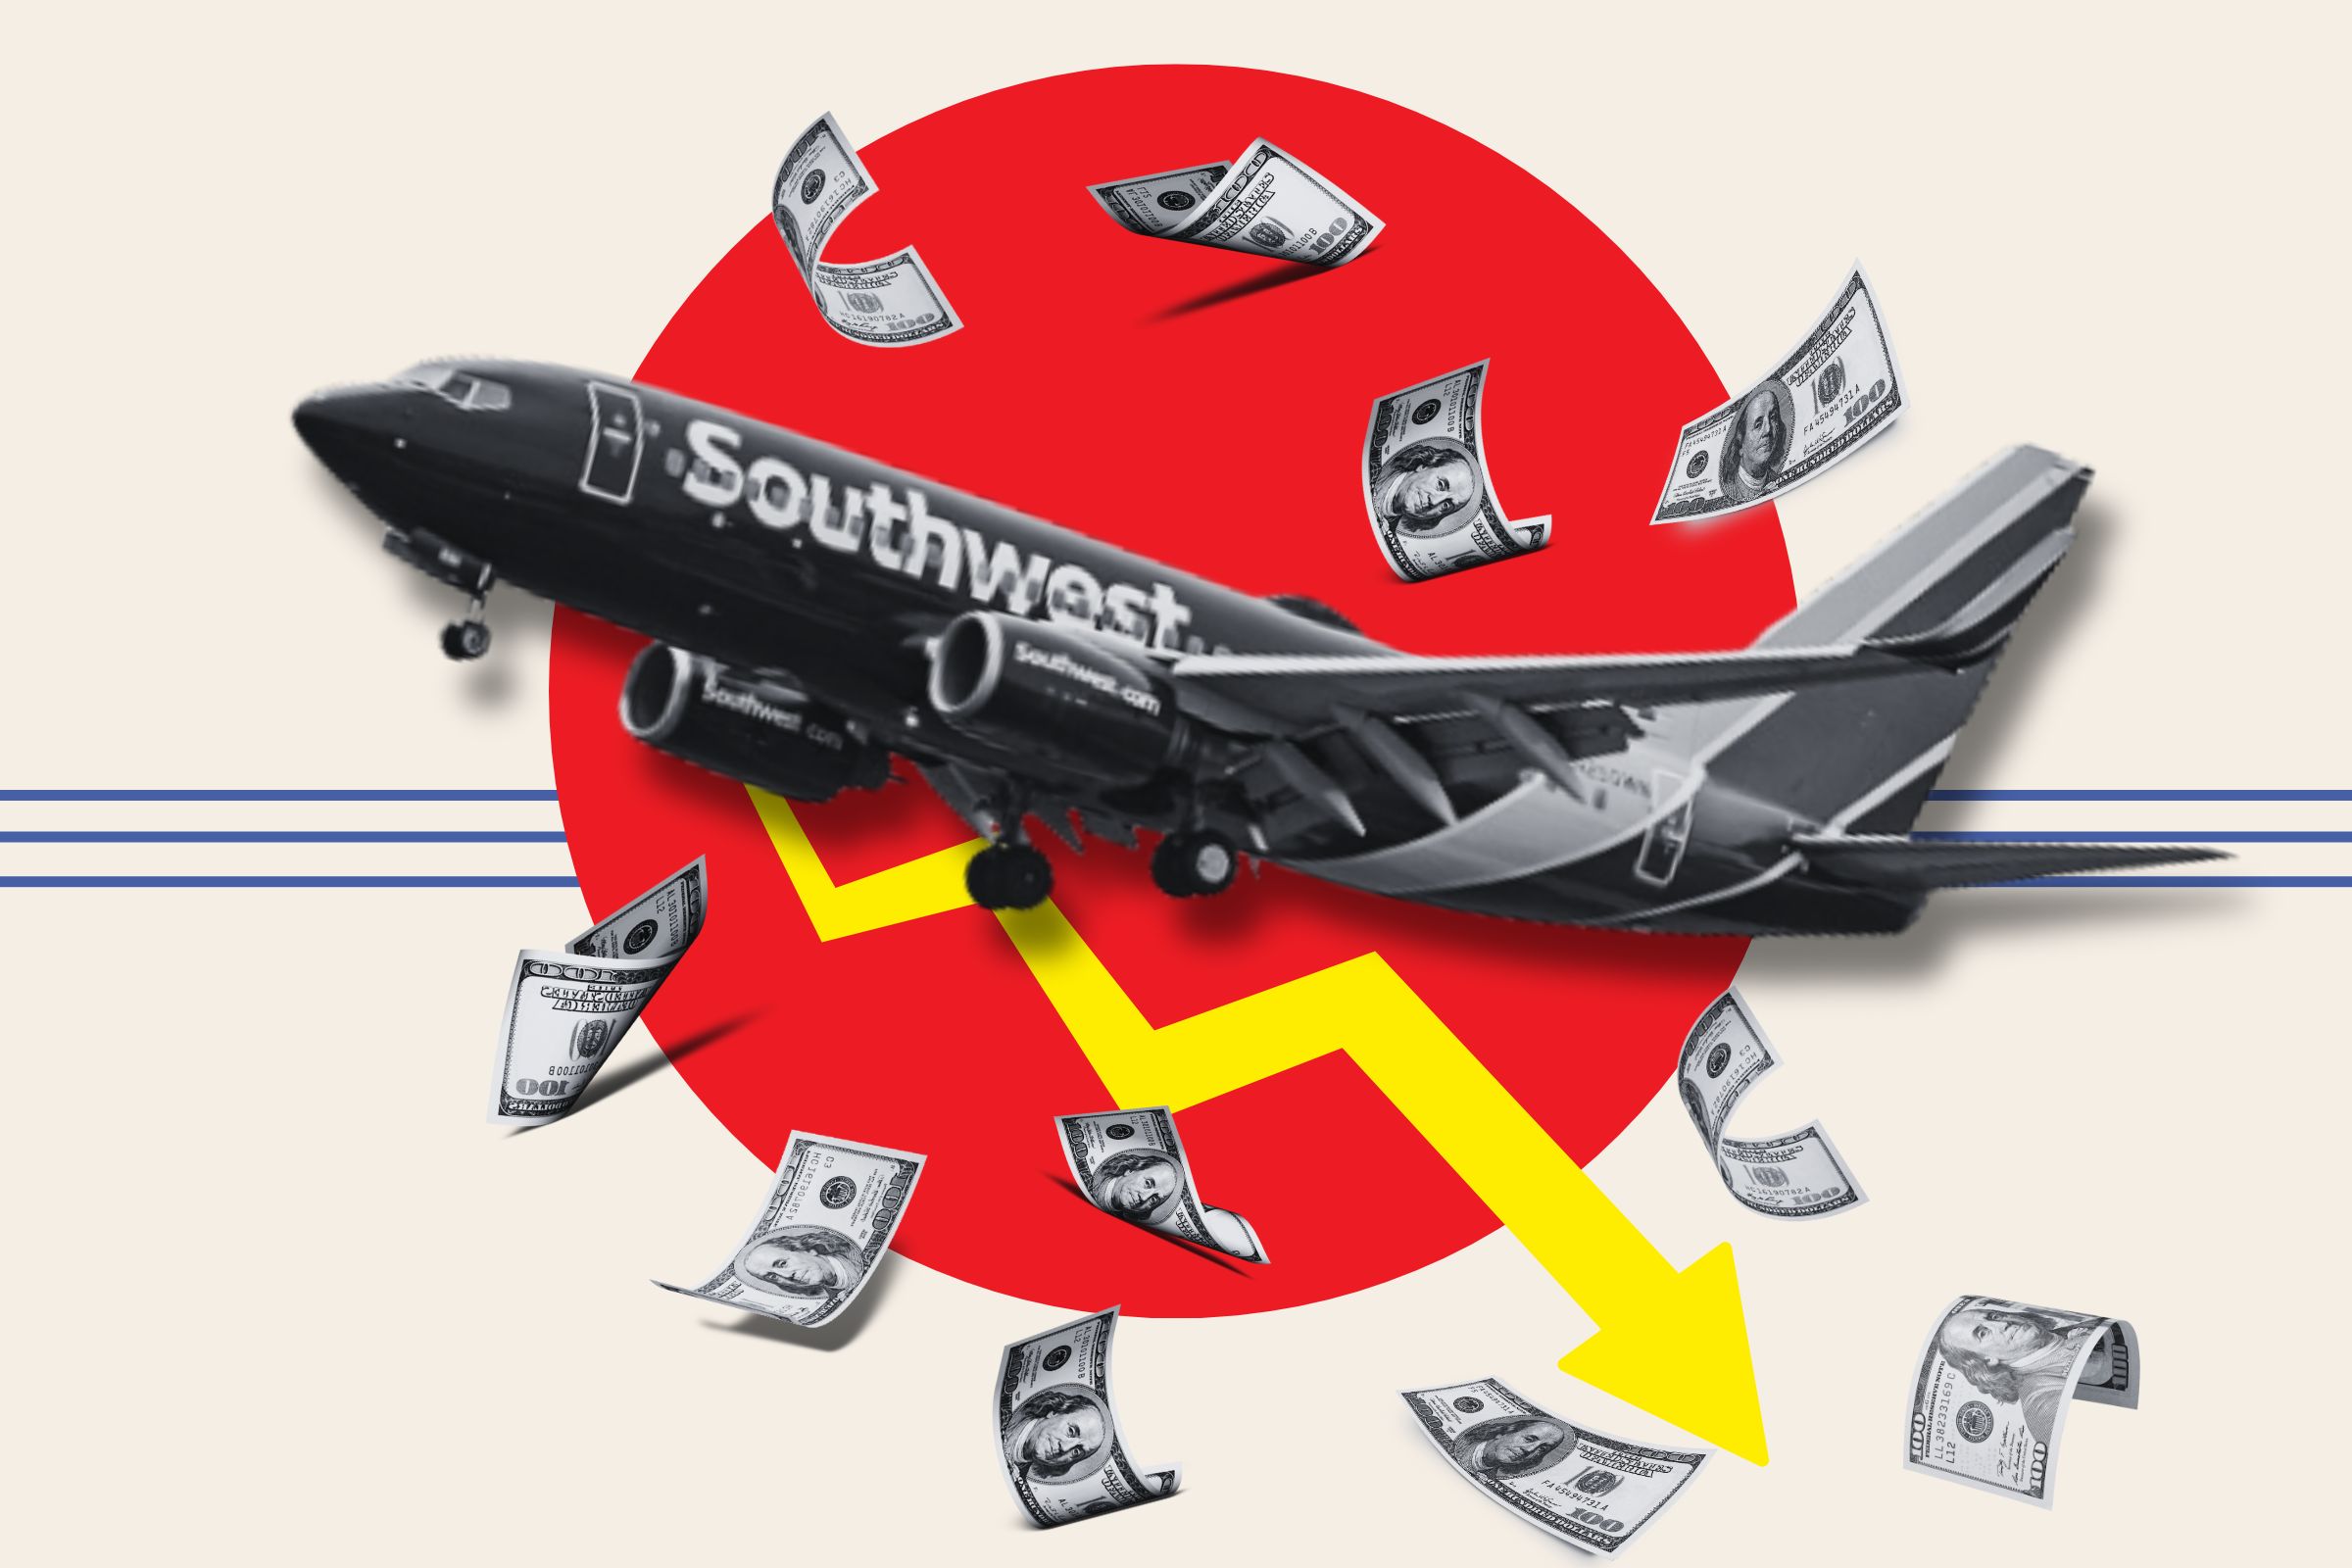 southwest airlines problems paint worrying picture for other companies